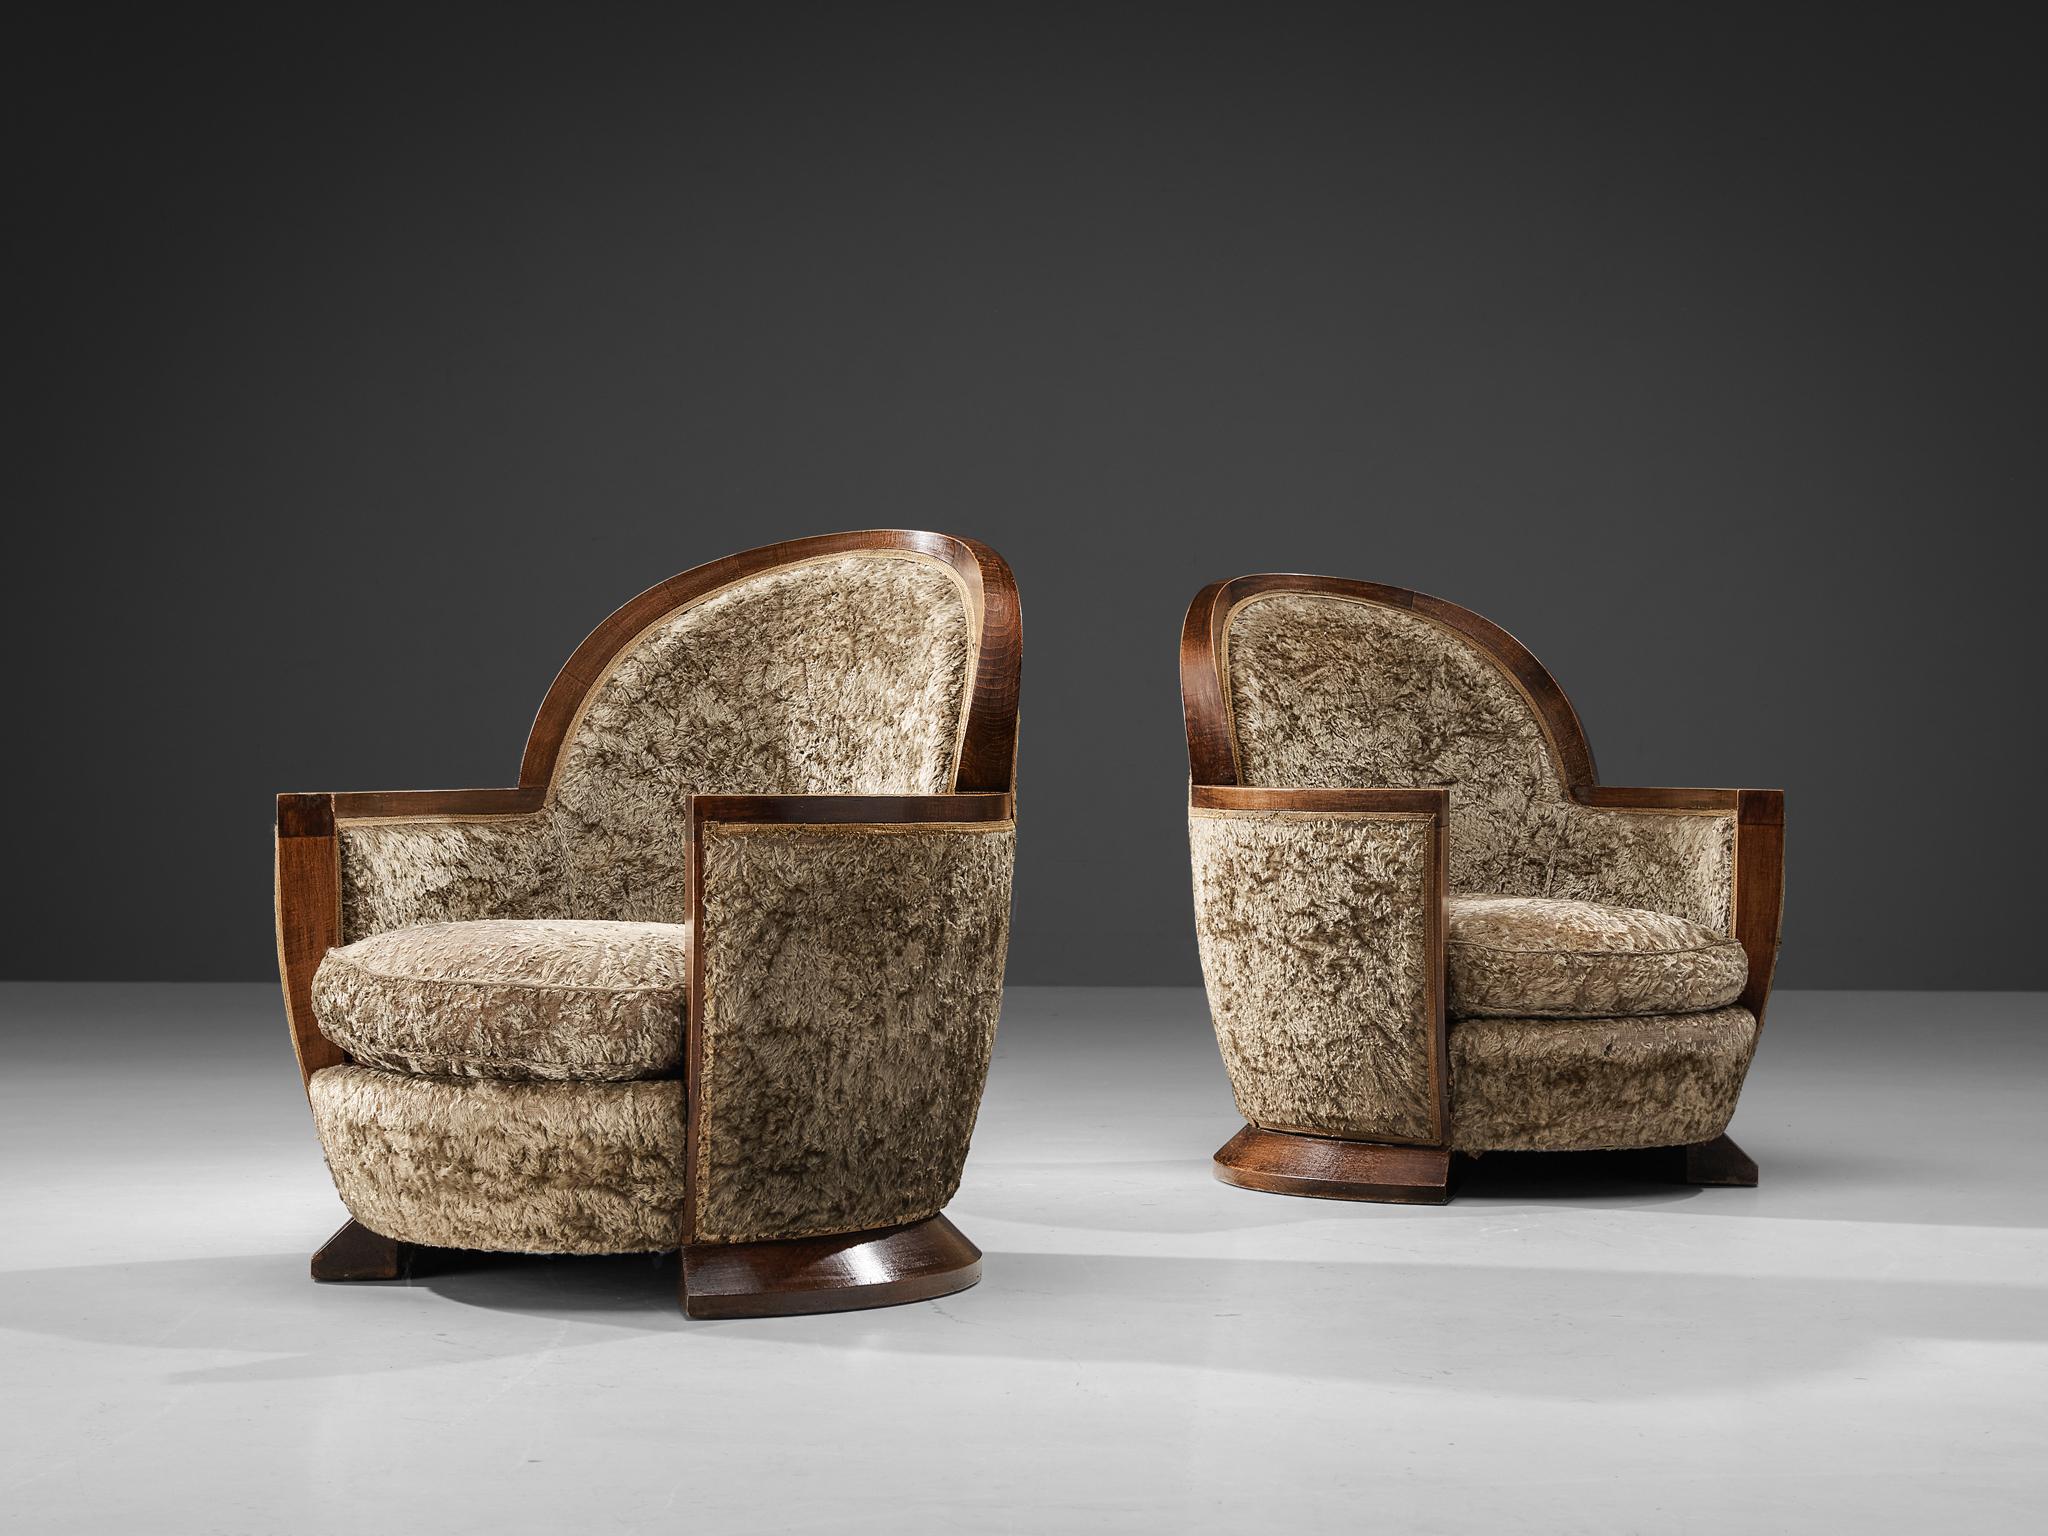 Gabriel Englinger, lounge chairs, wood, long pile velvet upholstery, France, 1928.

Rare pair of Art Deco armchairs designed by Gabriel Englinger in 1928. These chairs are upholstered in a taupe colored long pile velvet fabric which complements the